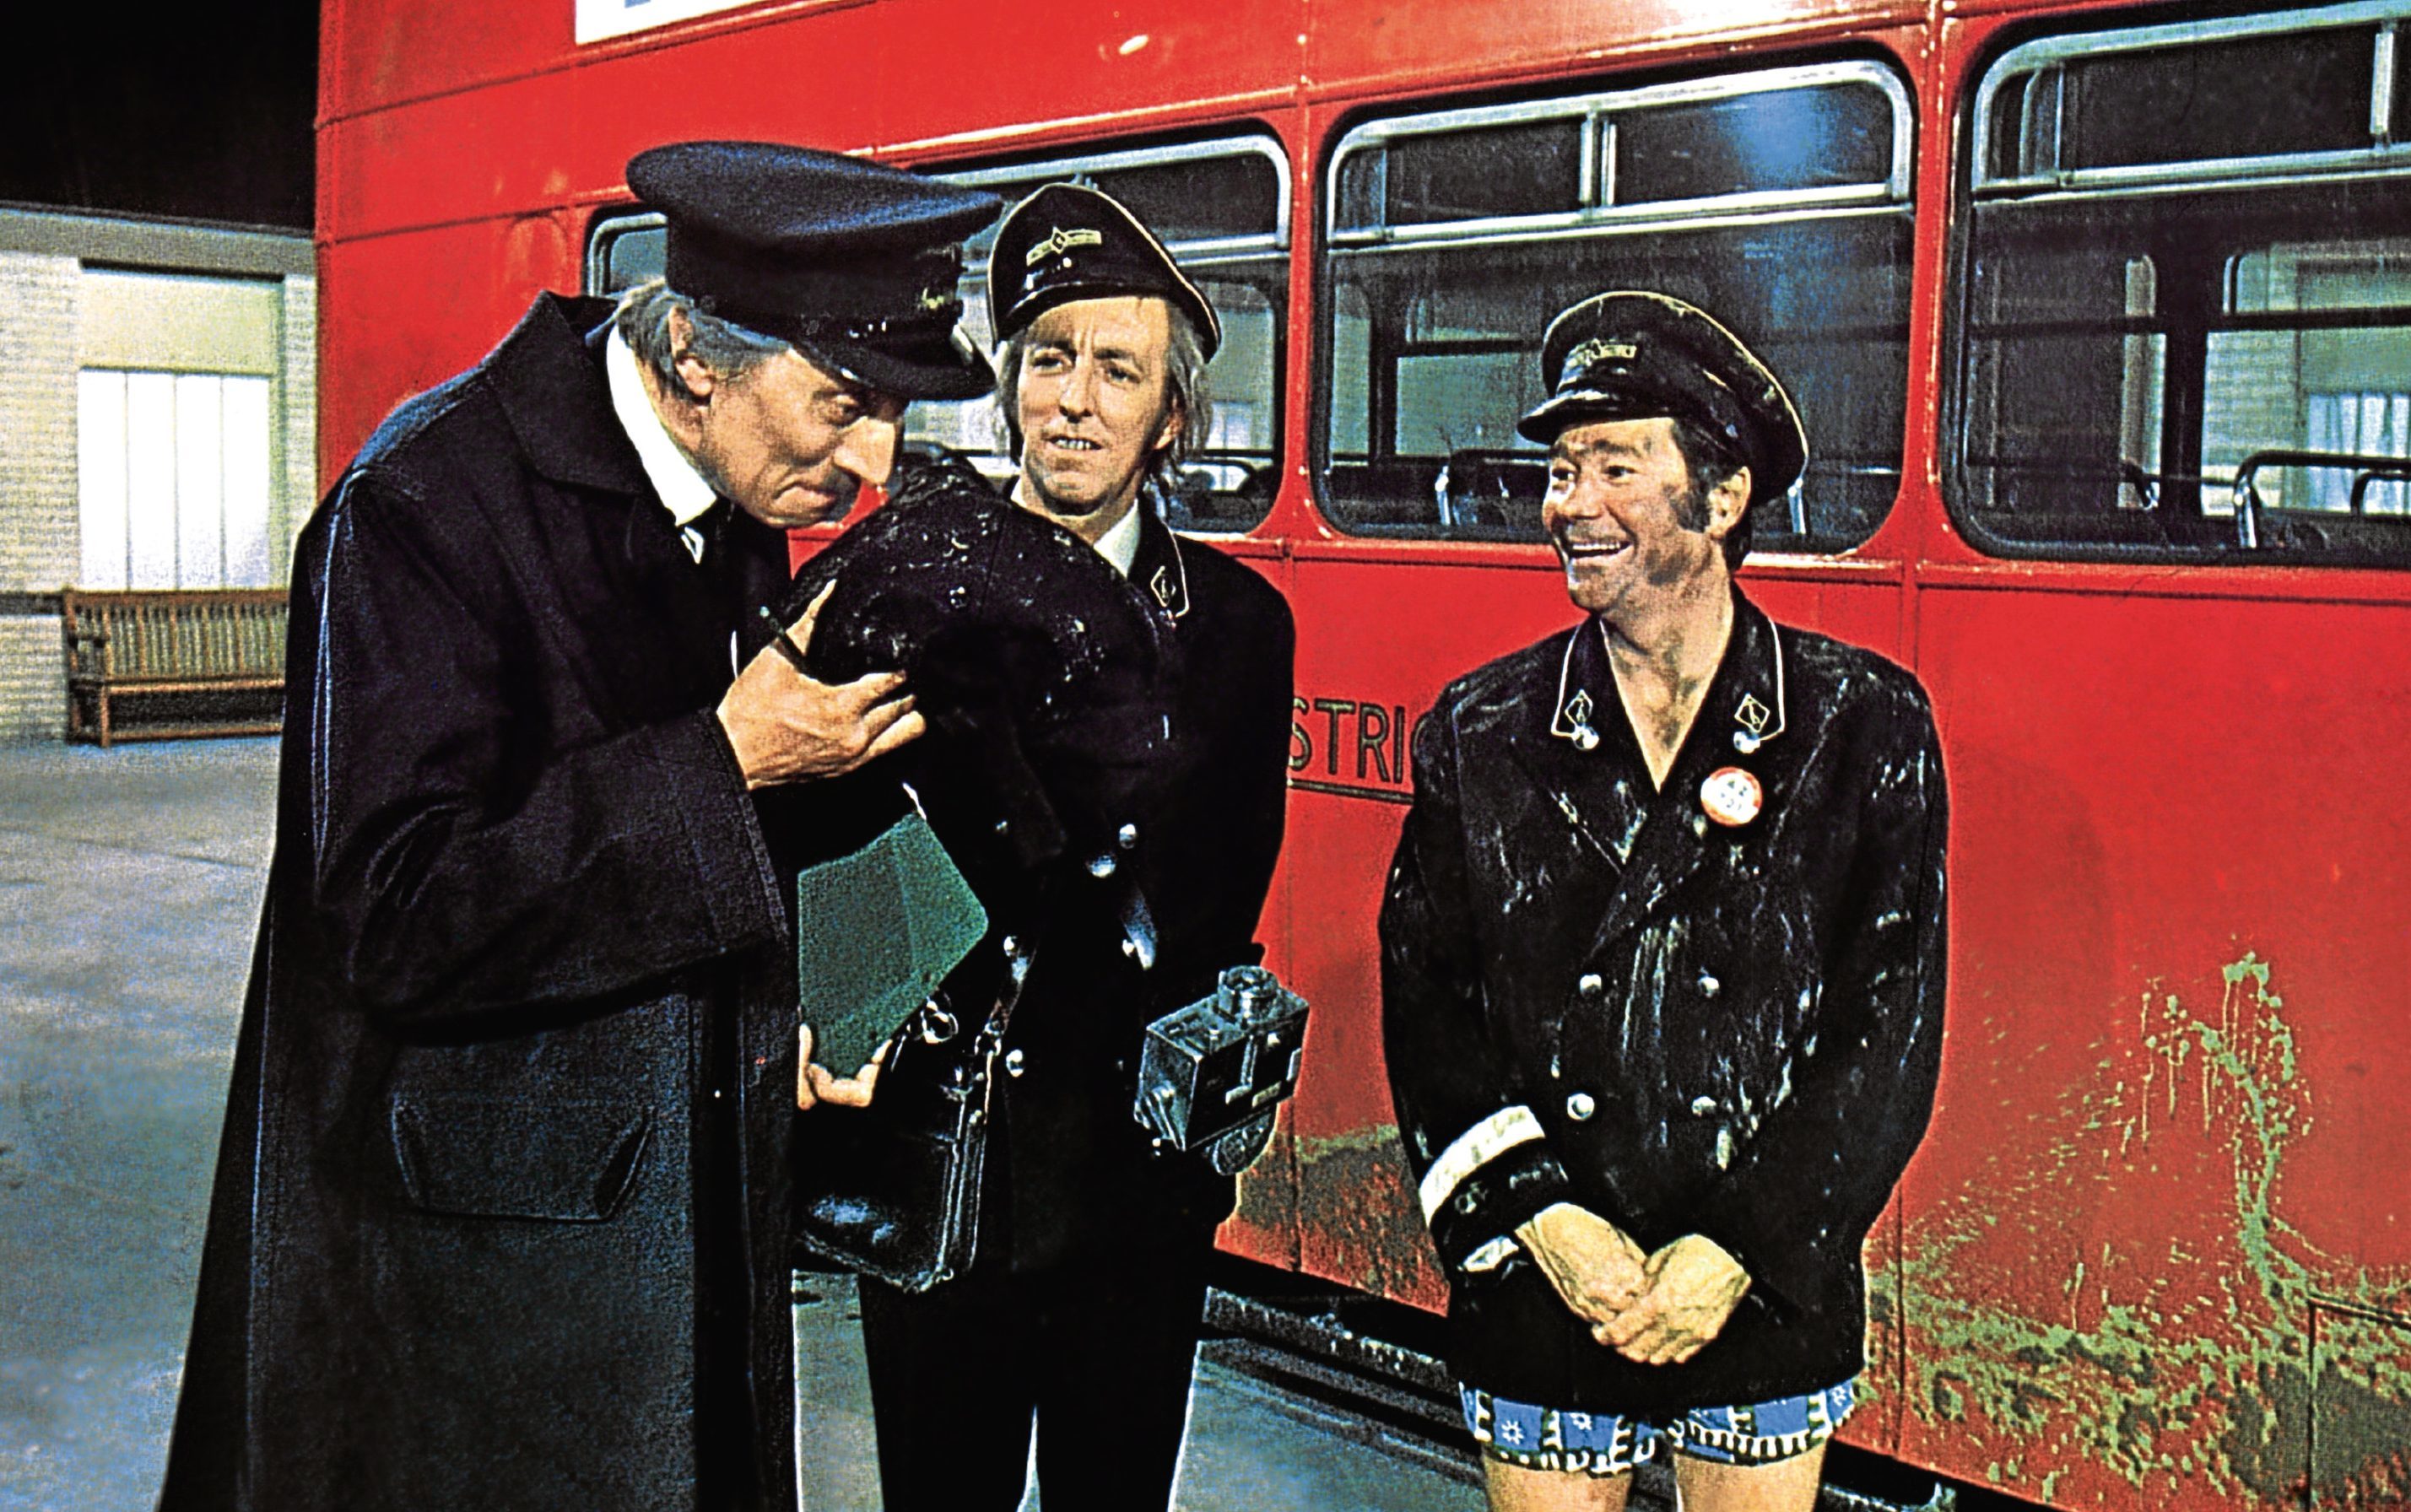 Mutiny On The Buses, 1972 (Allstar/ANGLO-EMI/STUDIOCANAL)